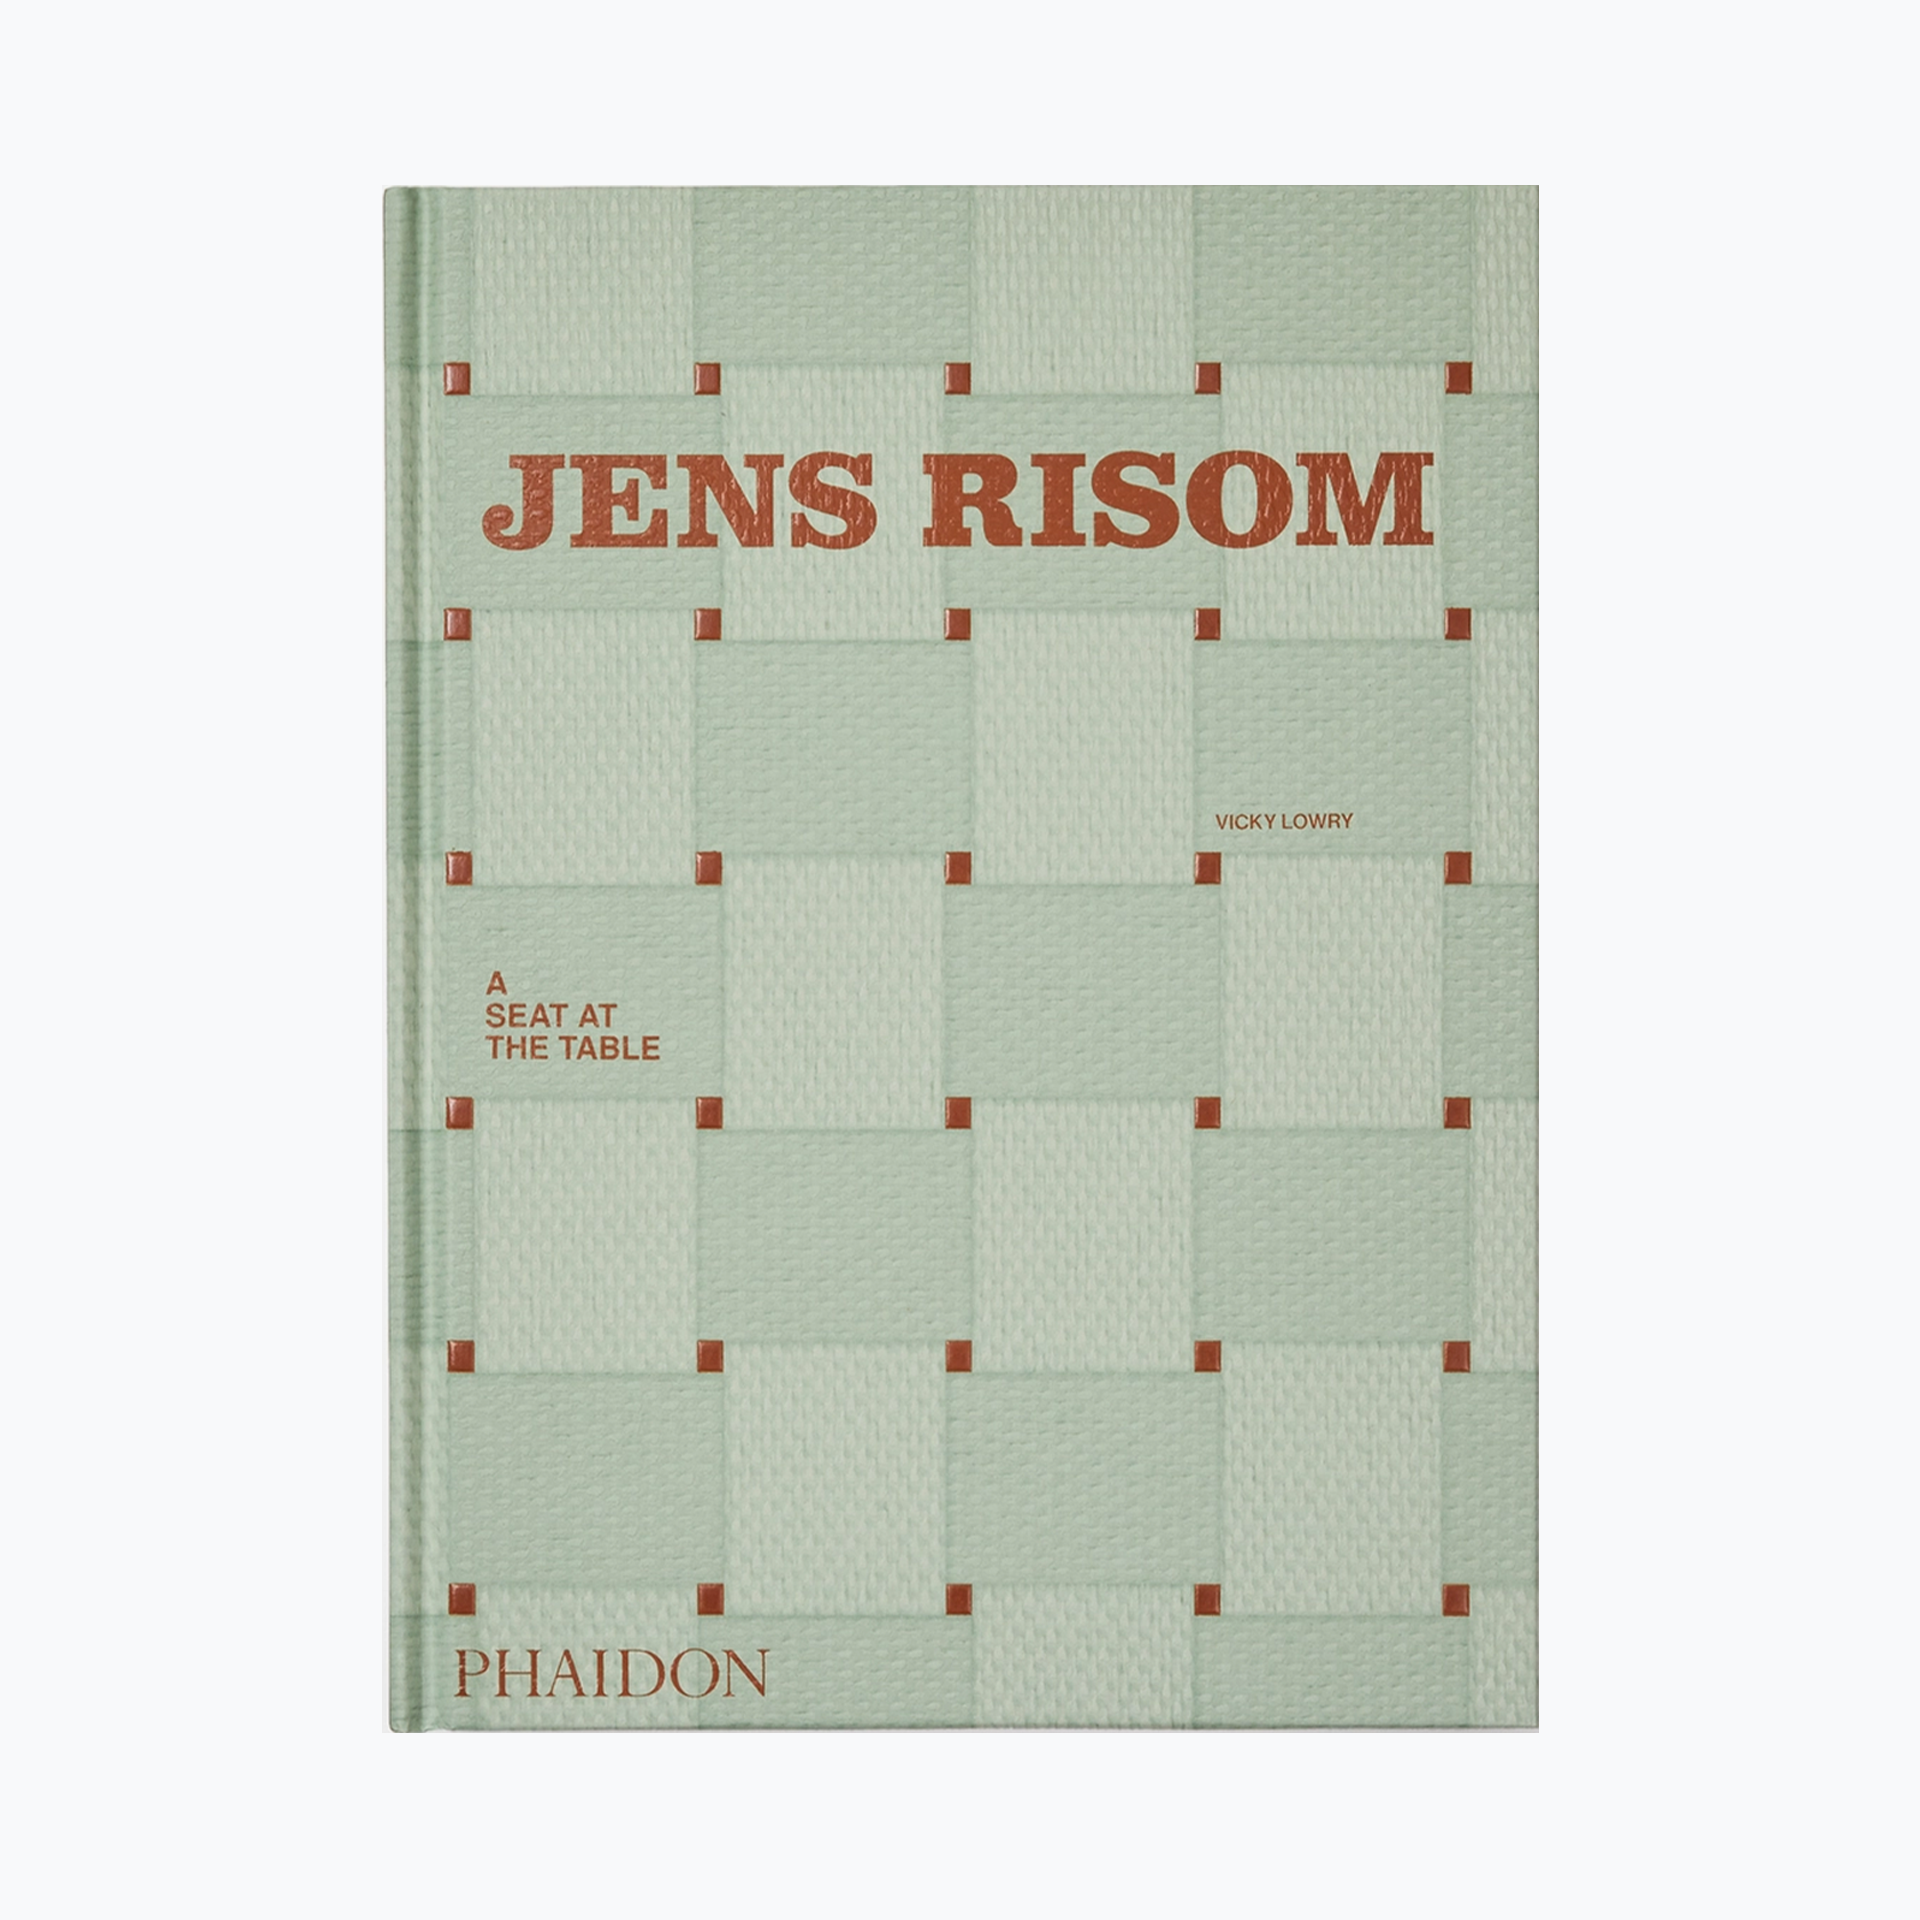 Jens Risom: A Seat at the Table Vicky Lowry (pre-order)